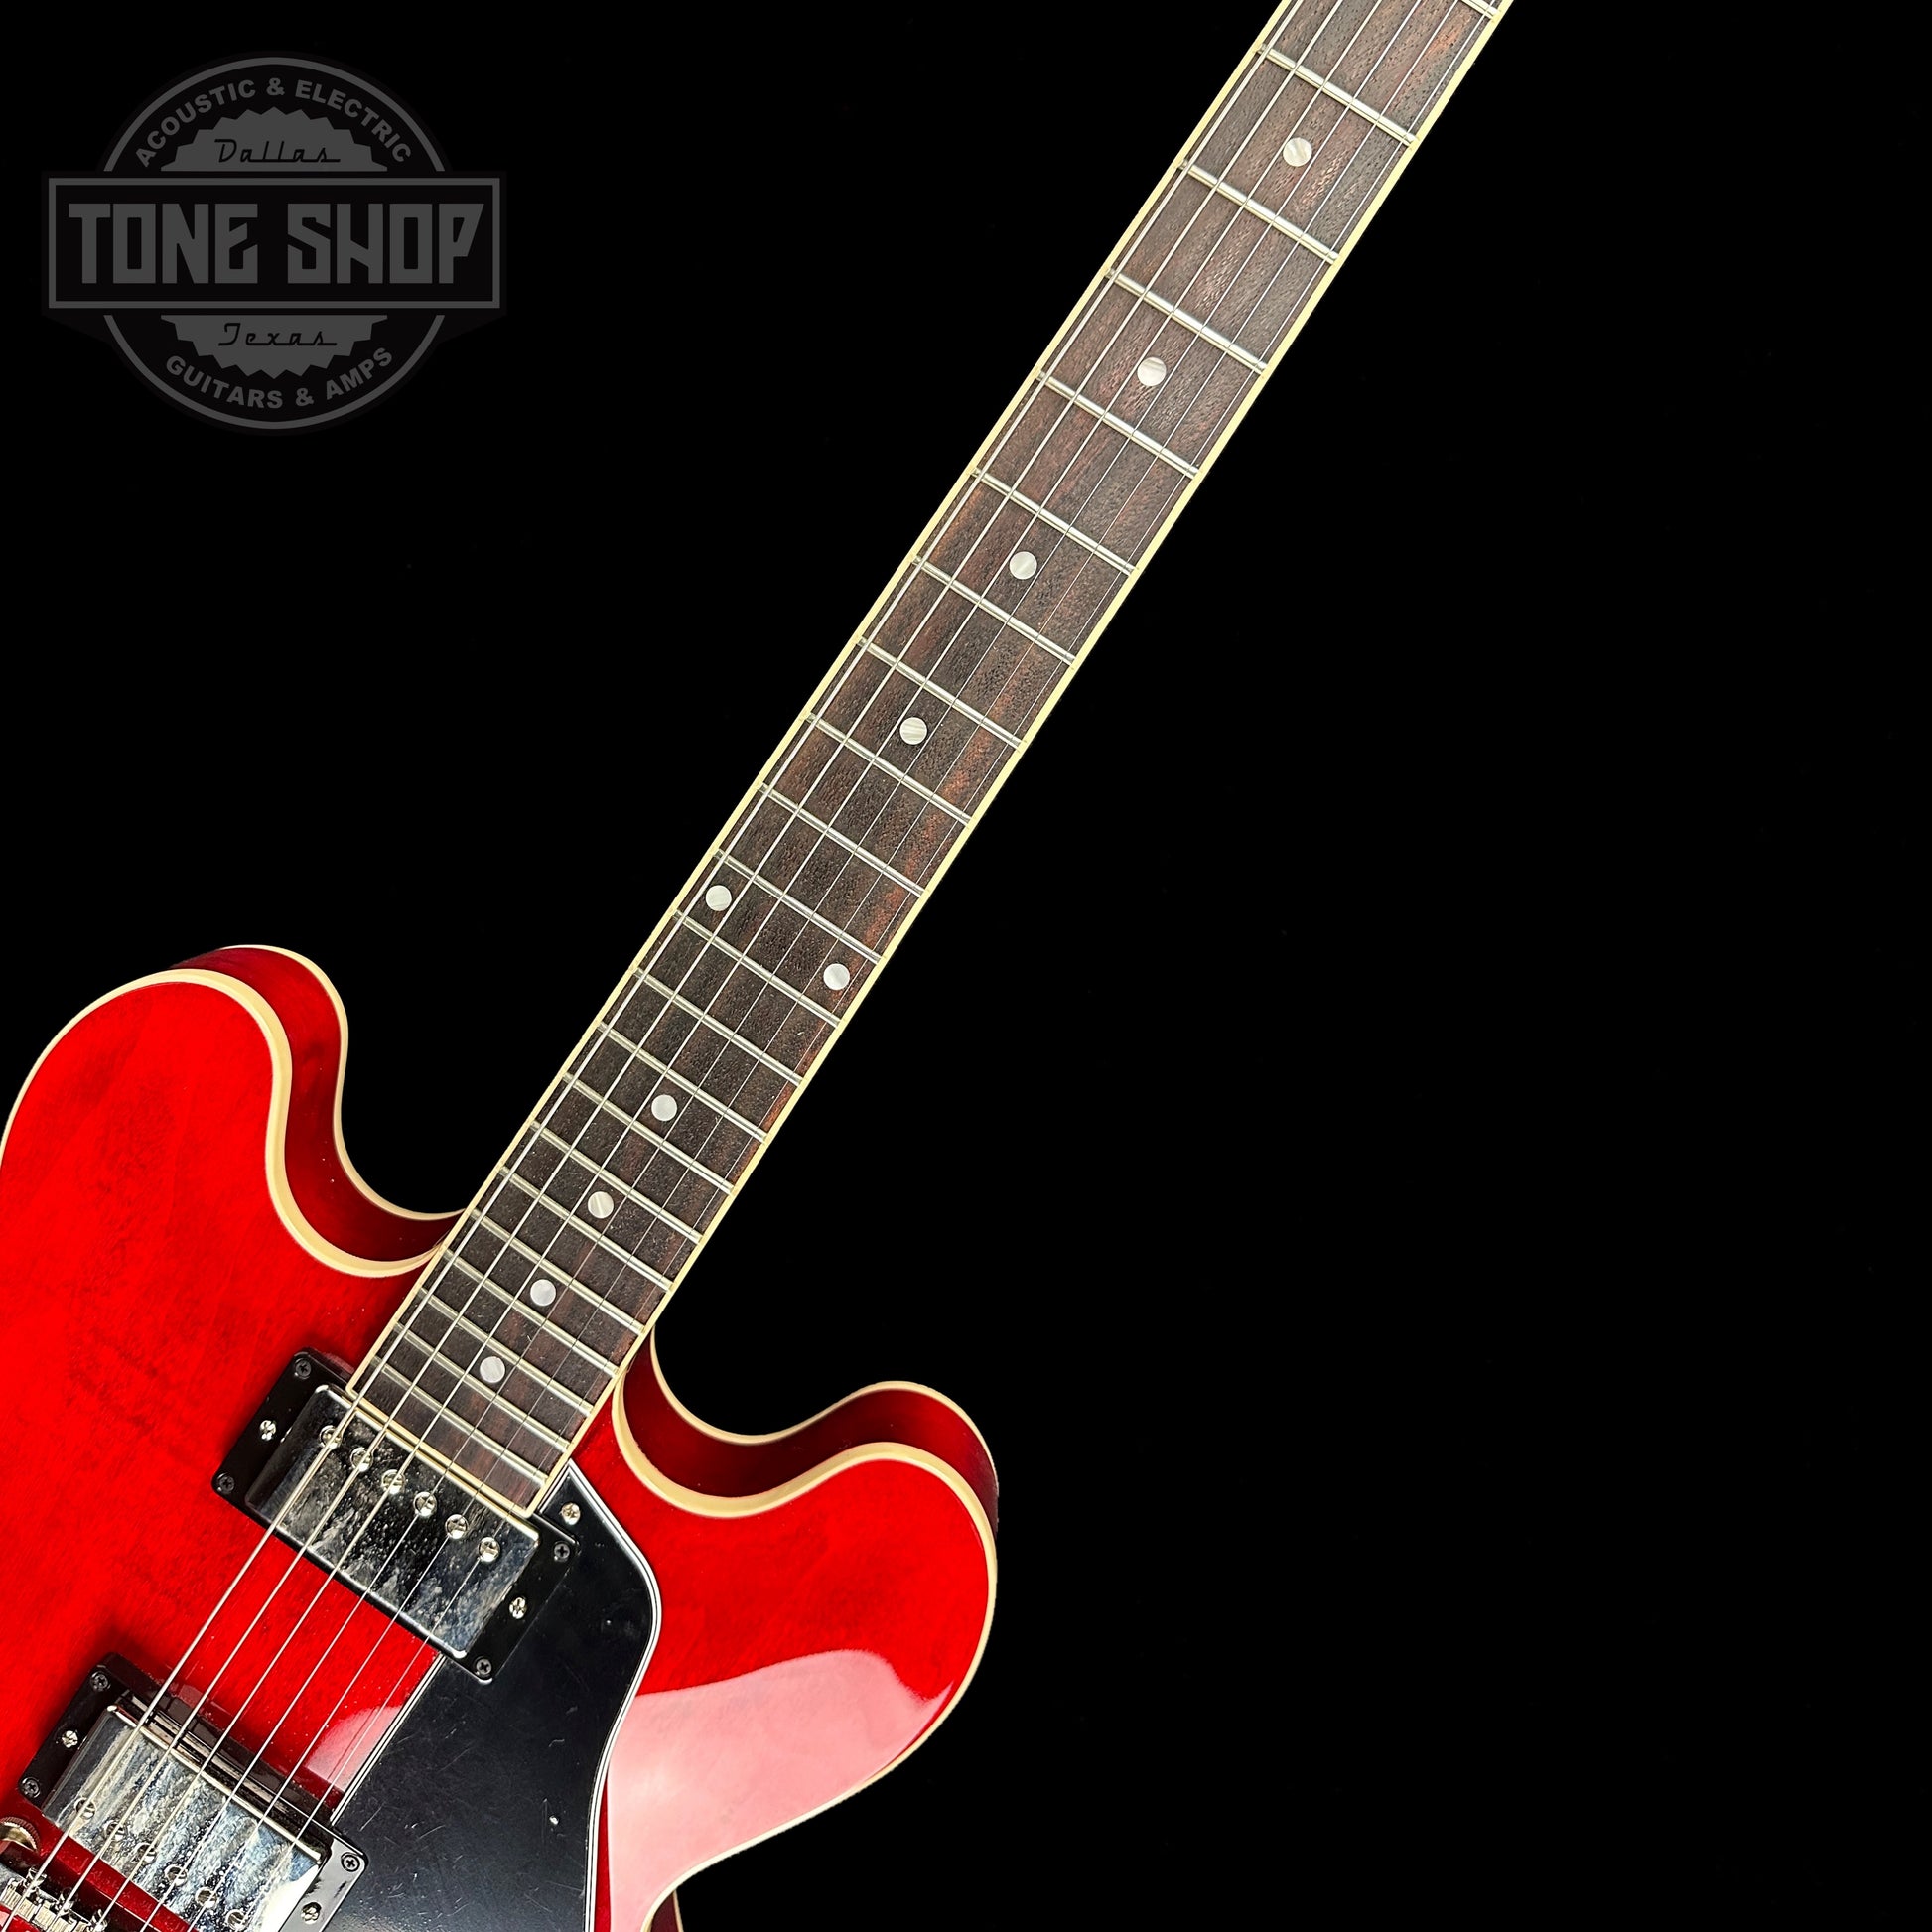 Fretboard of Used Gibson ES-335 Dot Cherry.